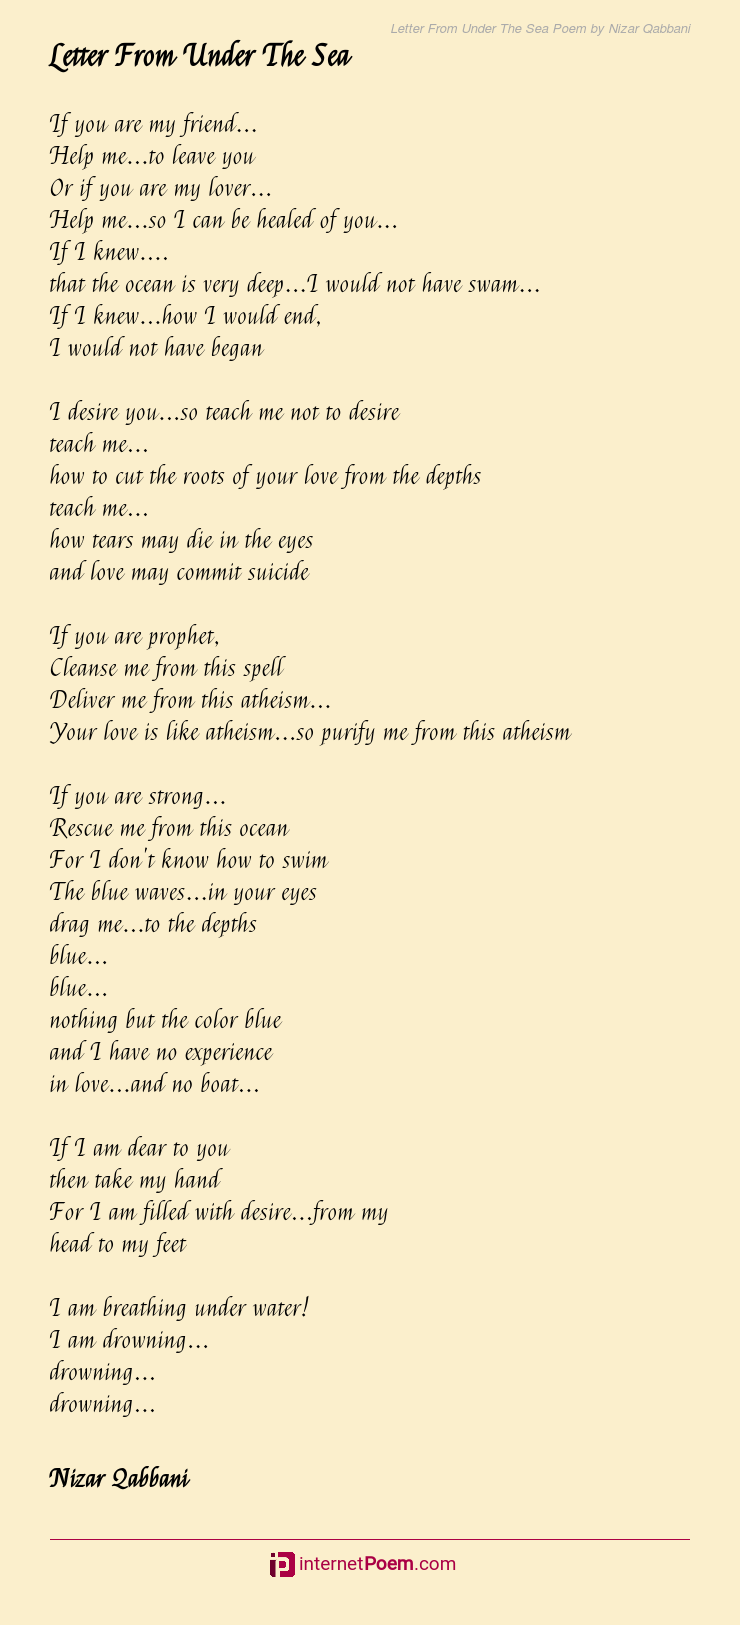 Letter From Under The Sea Poem by Nizar Qabbani